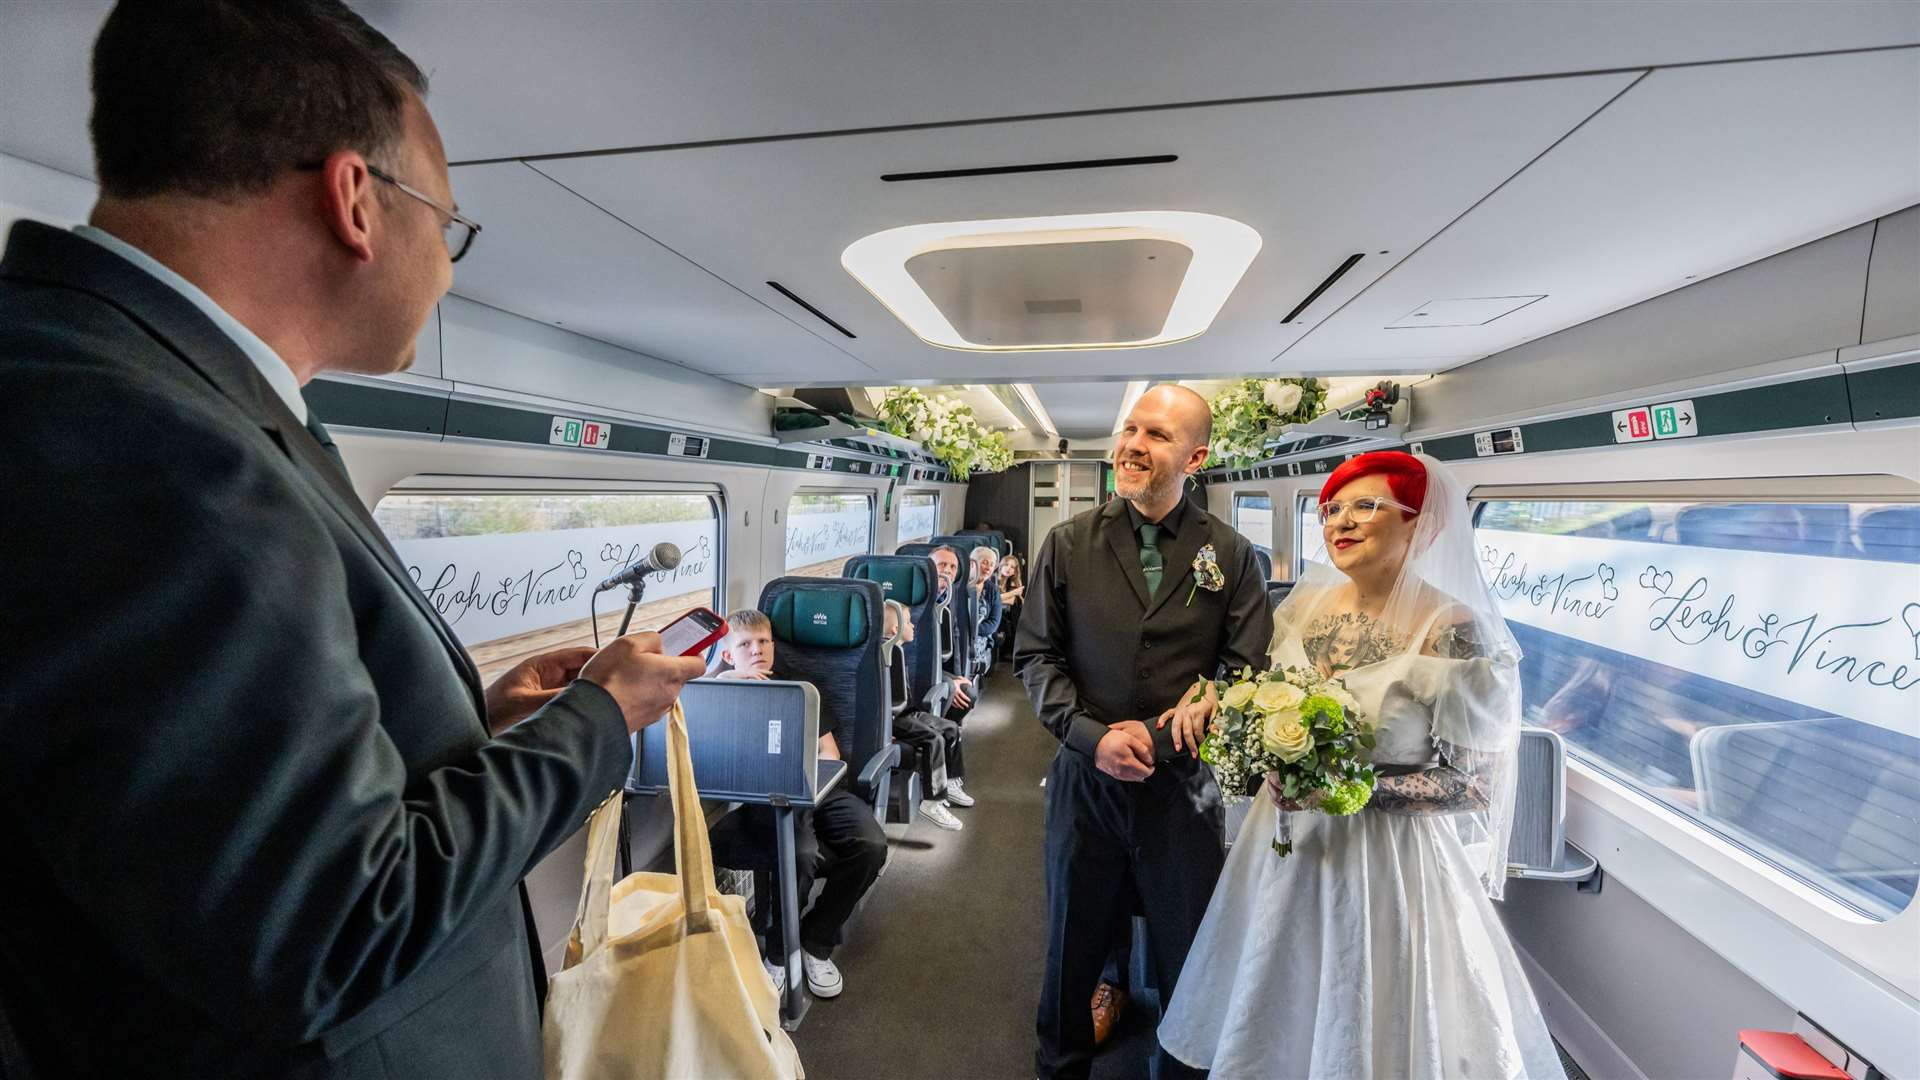 The train set off from London Paddington station and took the wedding party all the way to Swansea (GWR/PA)